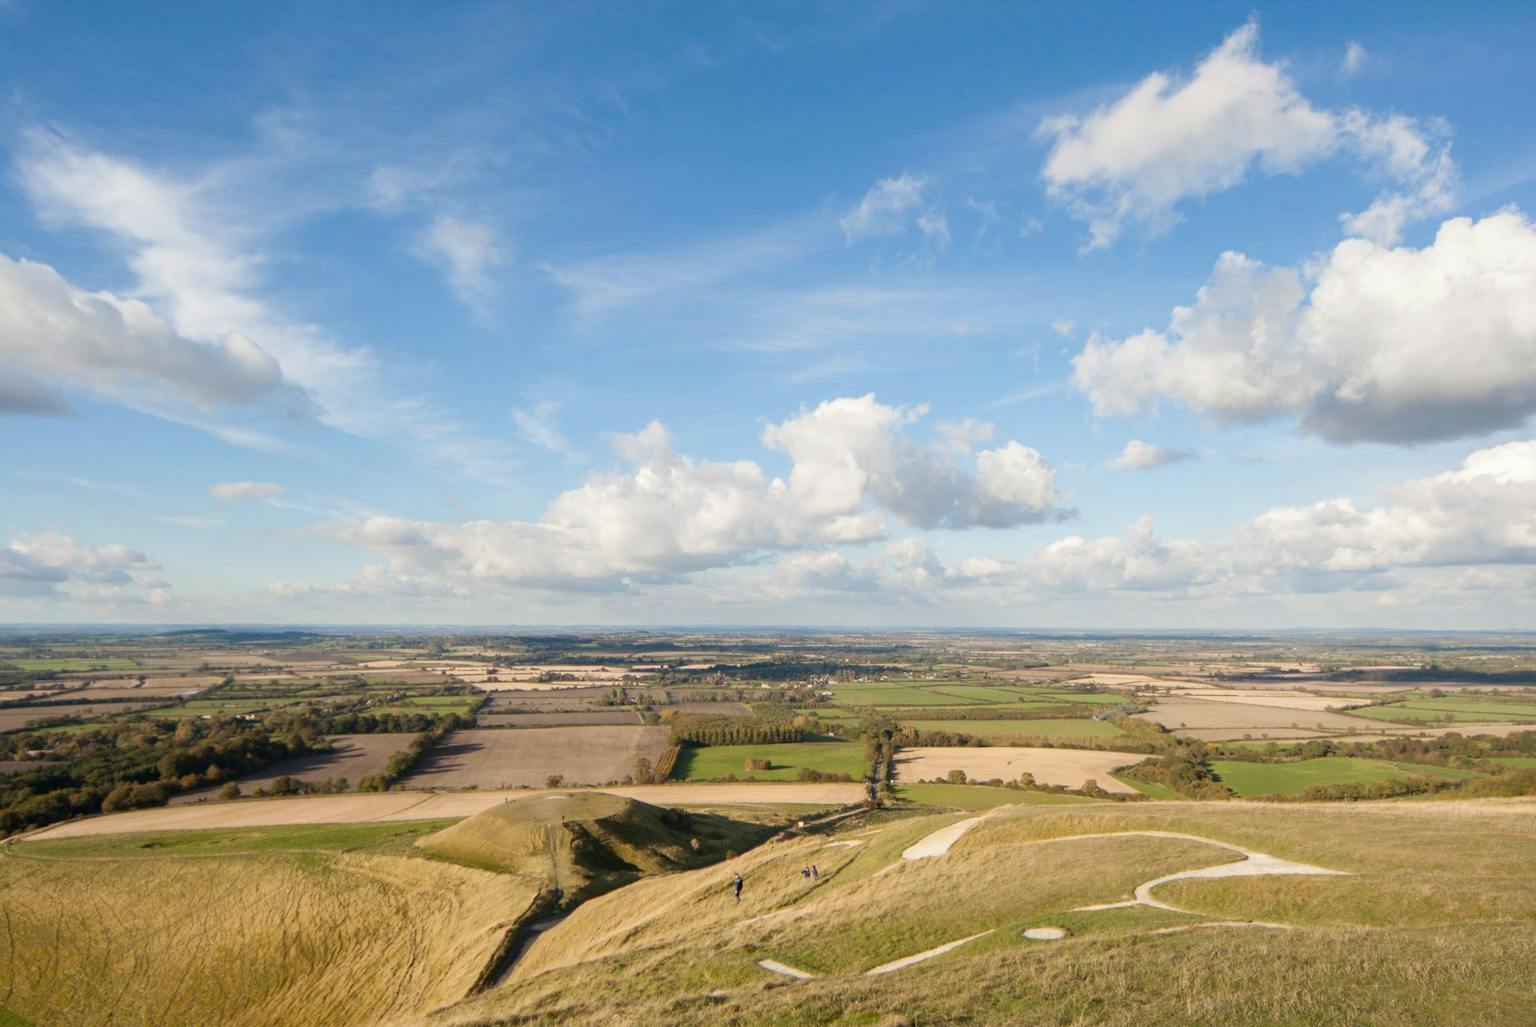 Aerial view of the Uffington White Horse, a prehistoric hill figure carved into the chalk downs of Oxfordshire, England. The horse is surrounded by rolling hills, farmland, and a vast sky with fluffy white clouds